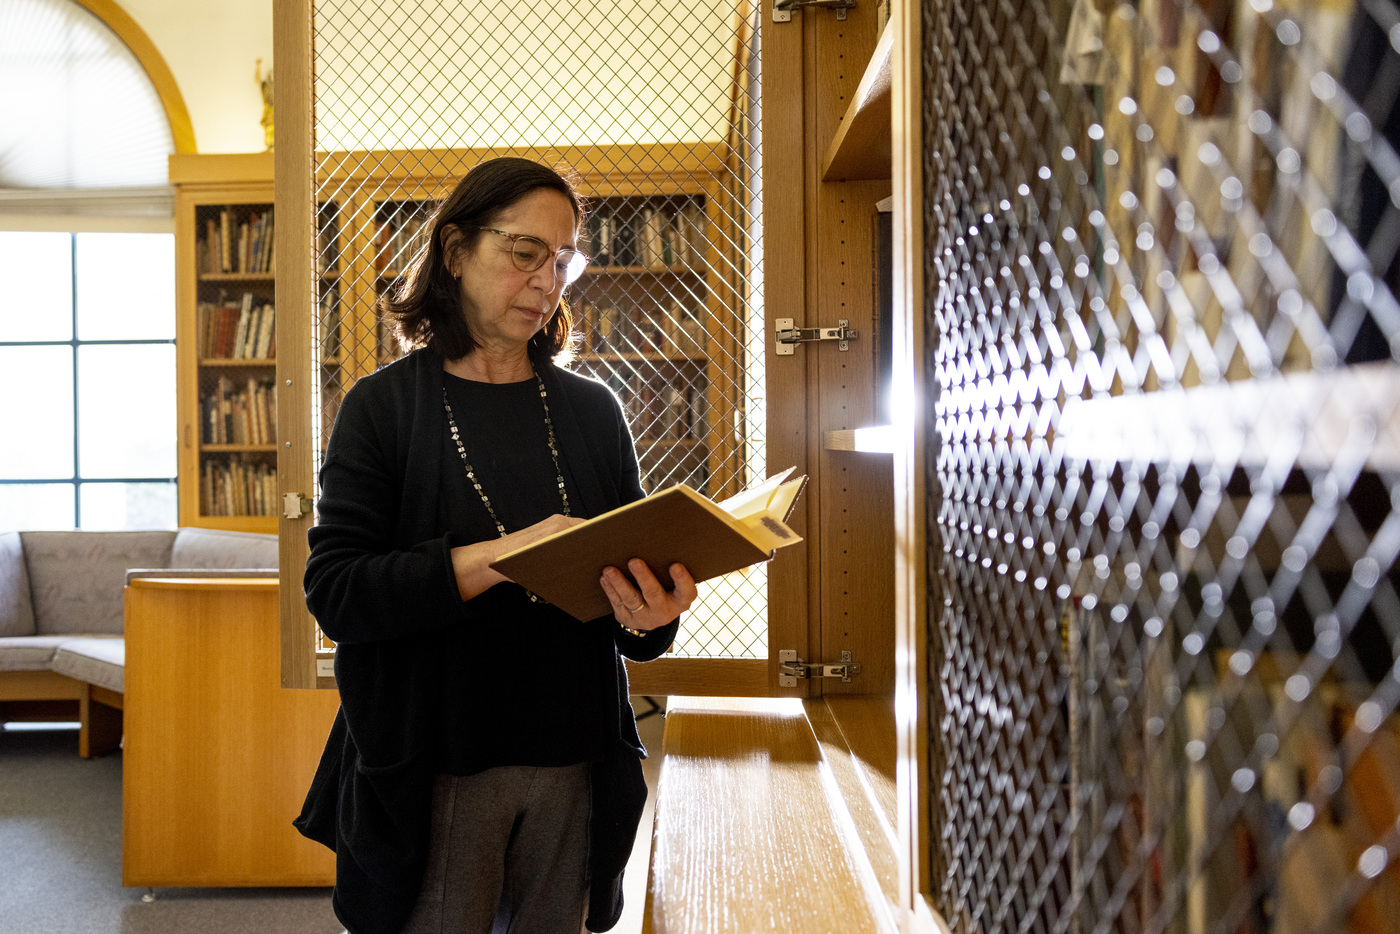 Janice Braun stands in the Heller Rare Book Room at F. W. Olin Library